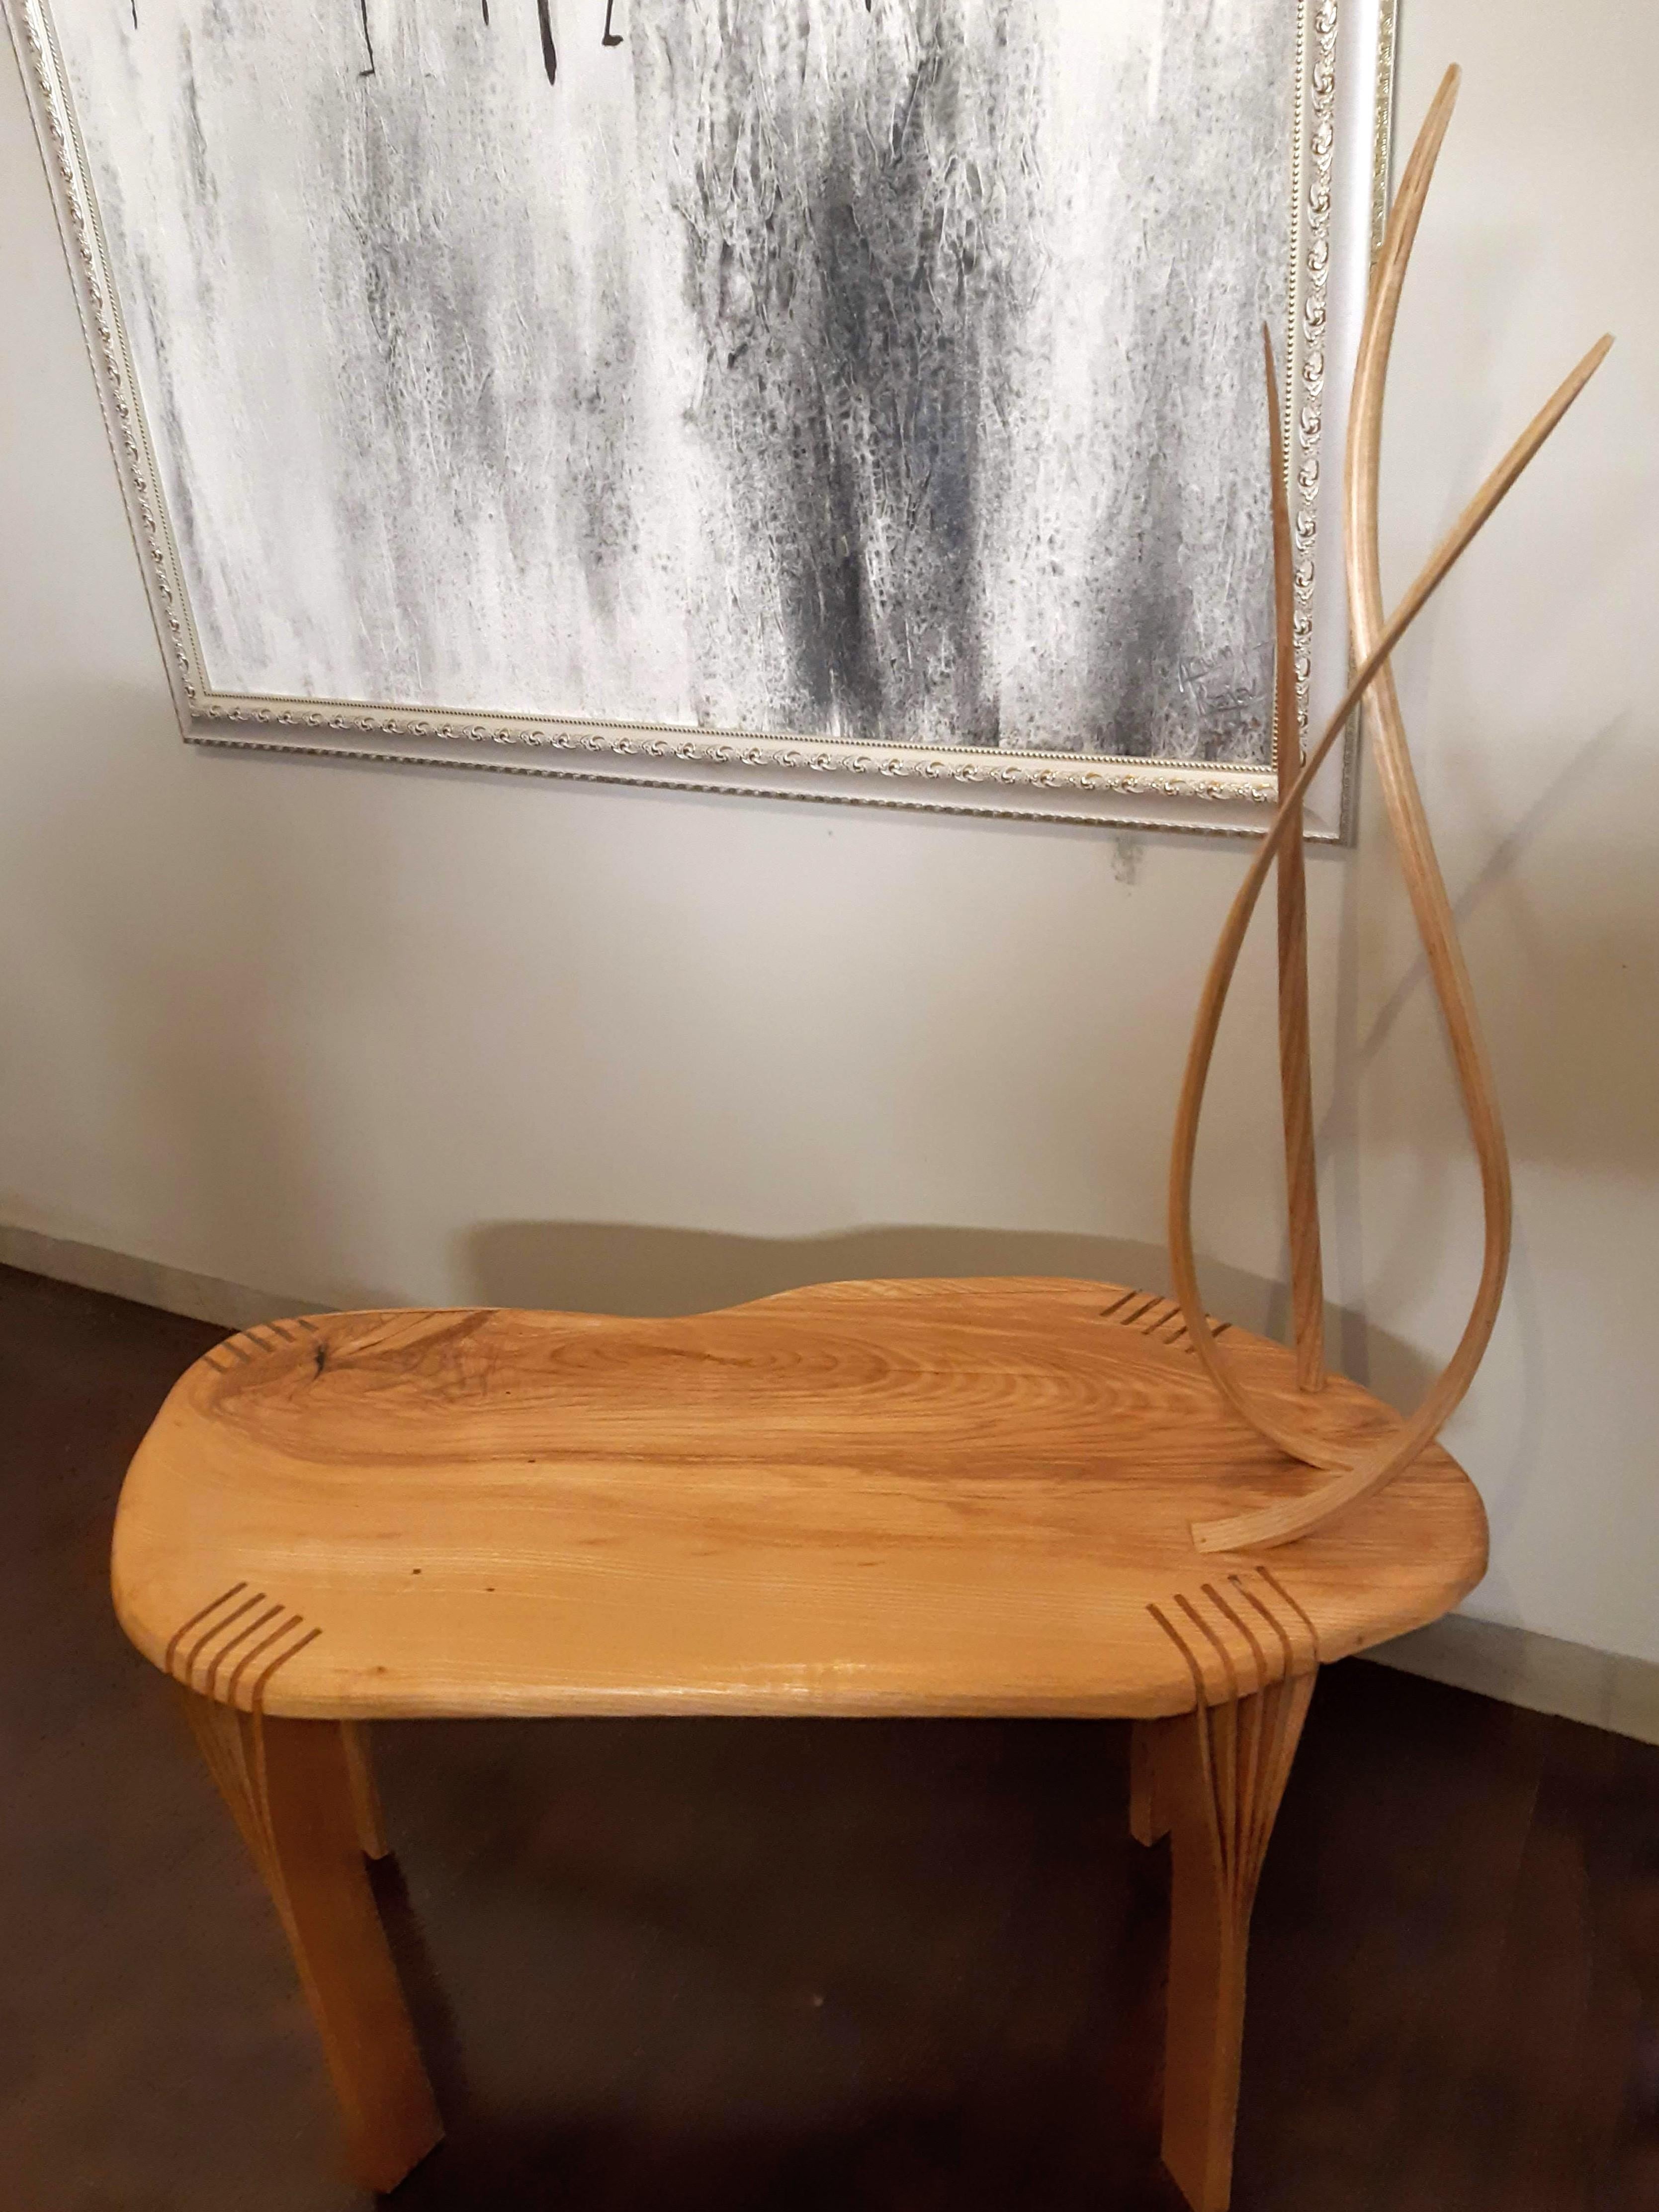 This piece is the Side Table No. 5 from the Vrksa Series.

The table is made using solid ash wood and it features vertically shaped strips of wood that have been bent and then carved to give them a smooth natural flow. The legs for the piece are